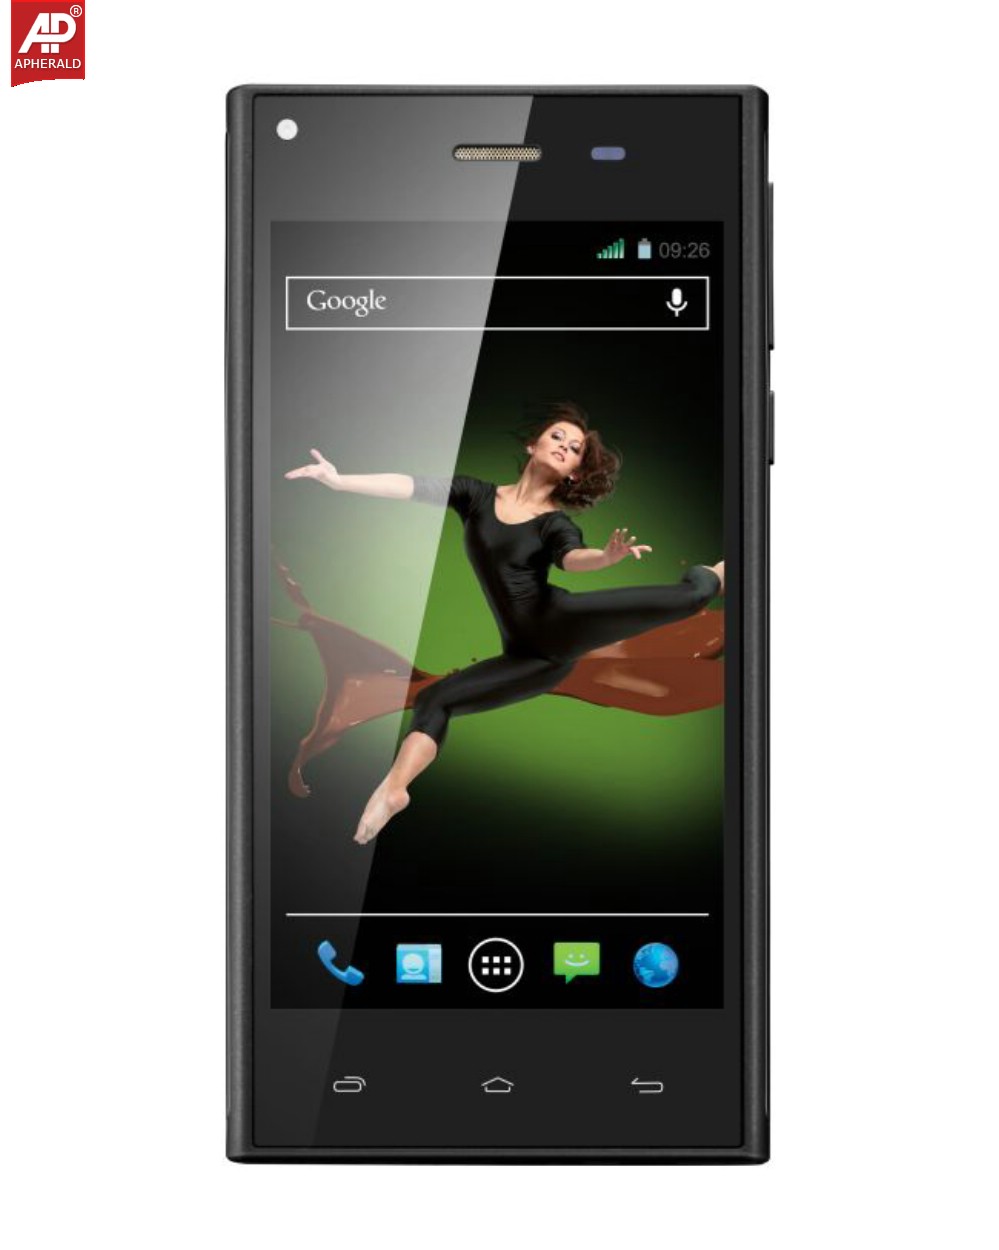 The Cheap Xolo Q600S KitKat Phone Launched